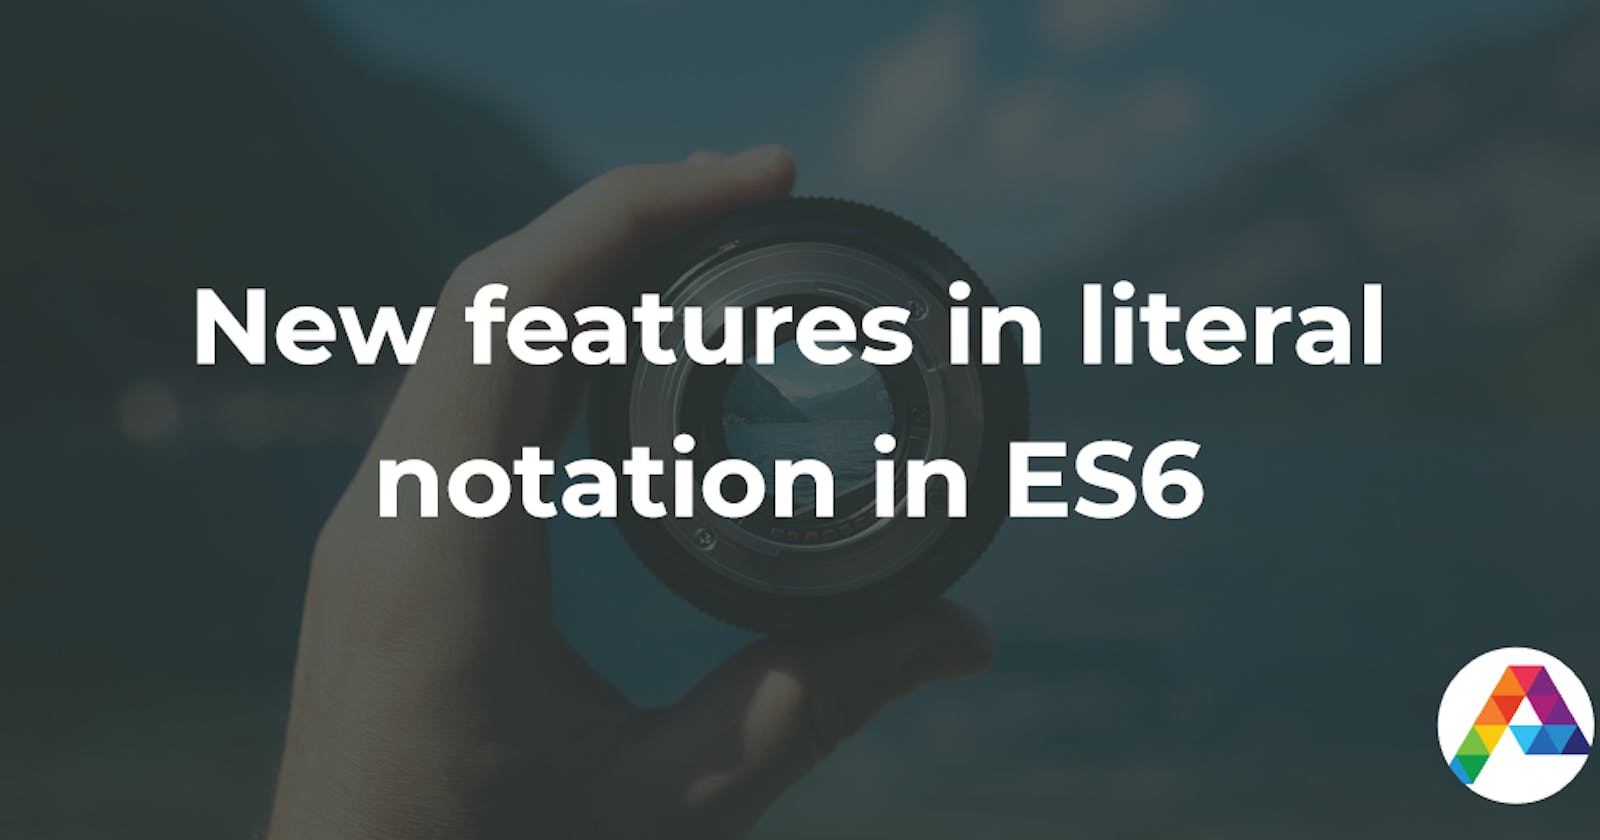 New features in literal notation in ES6